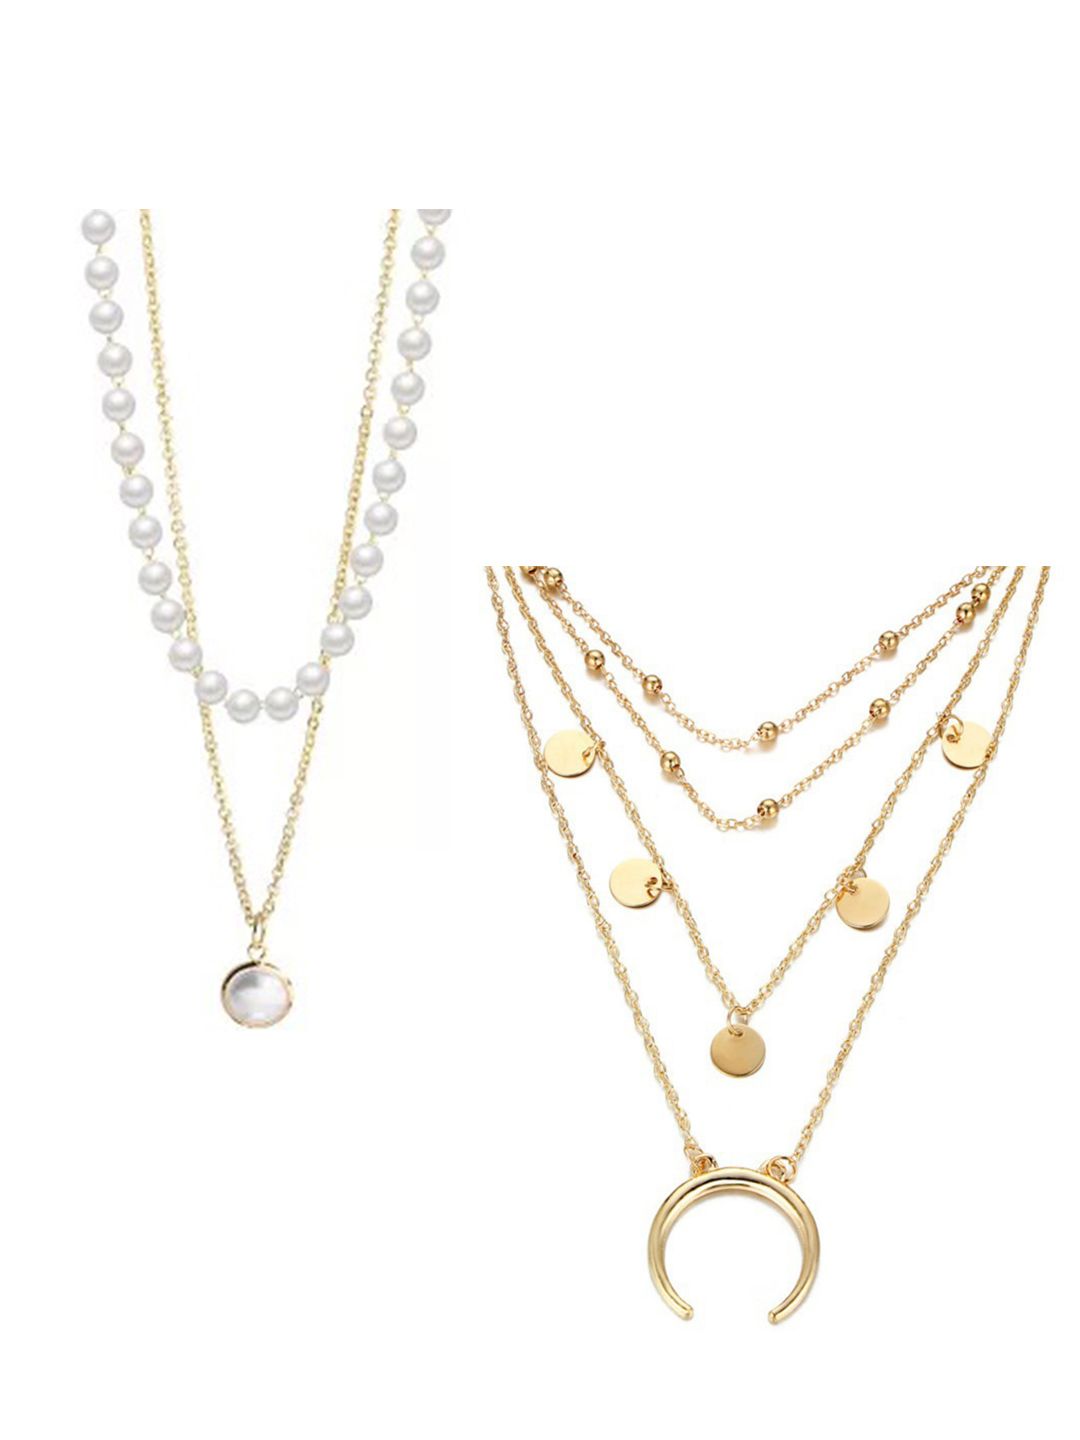 Vembley Set Of 2 Gold-Toned & White Double and Triple Layered Beads Pendant Necklace Price in India